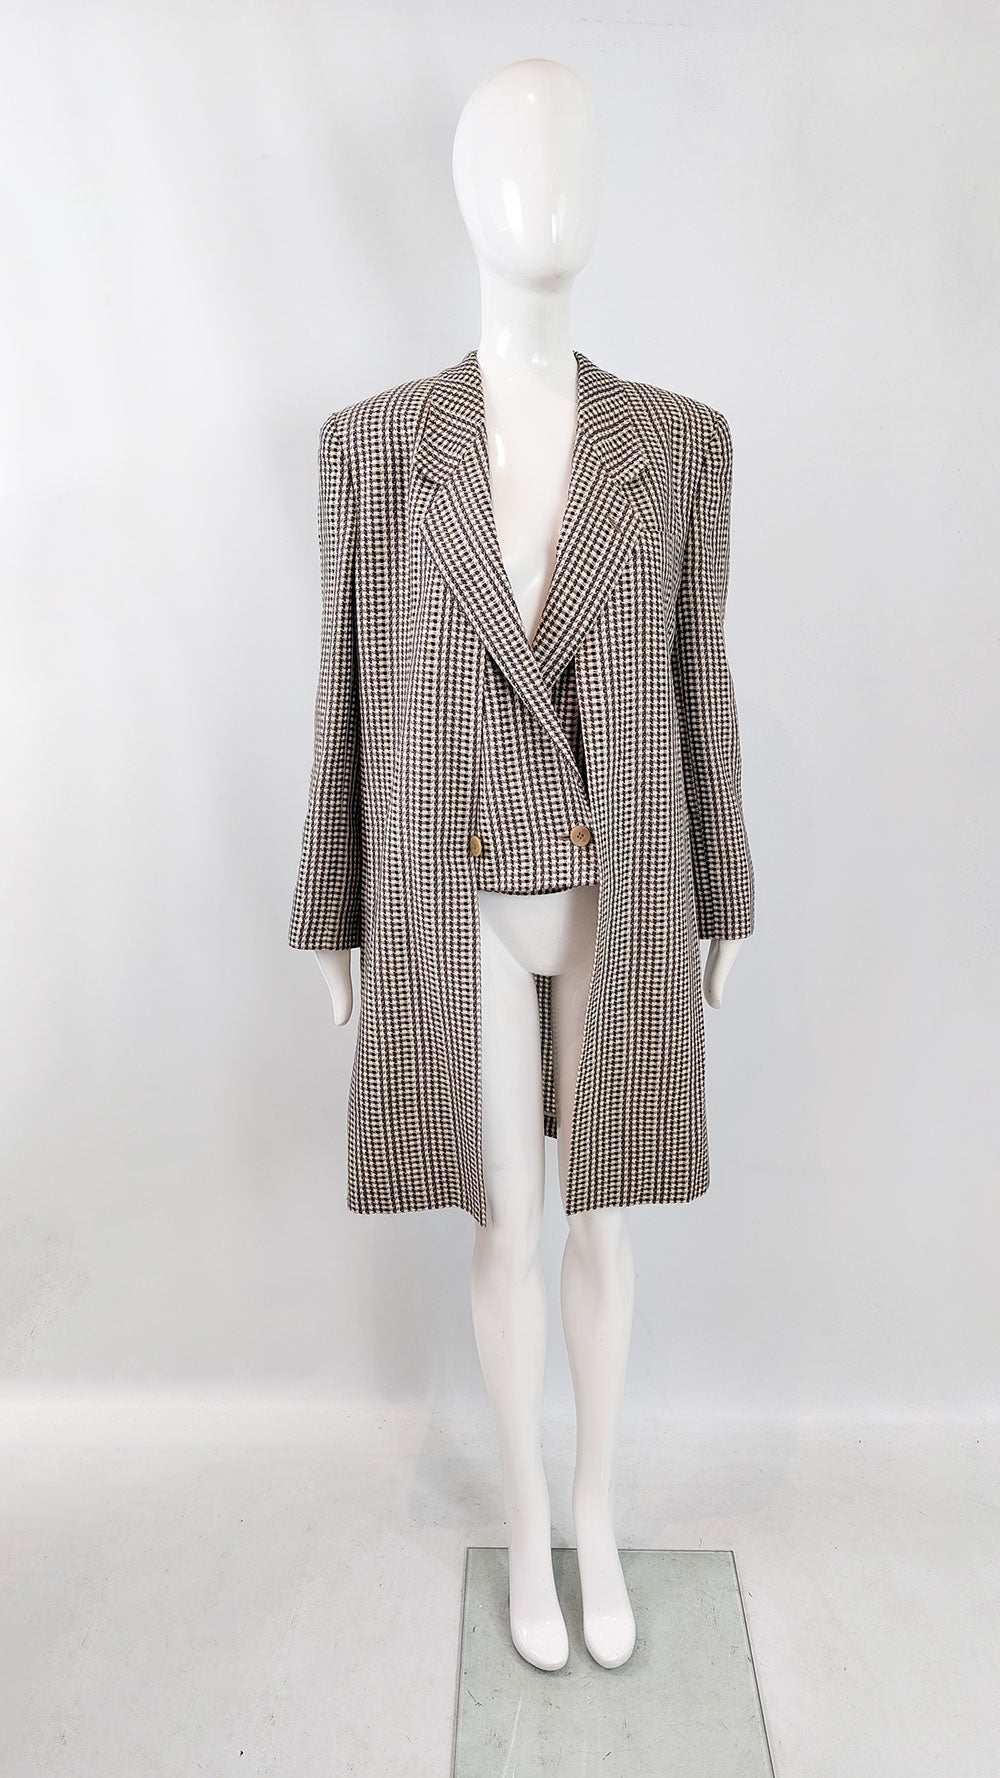 A vintage Giorgio Armani coat from the 1980s in a white, brown and black tweed.